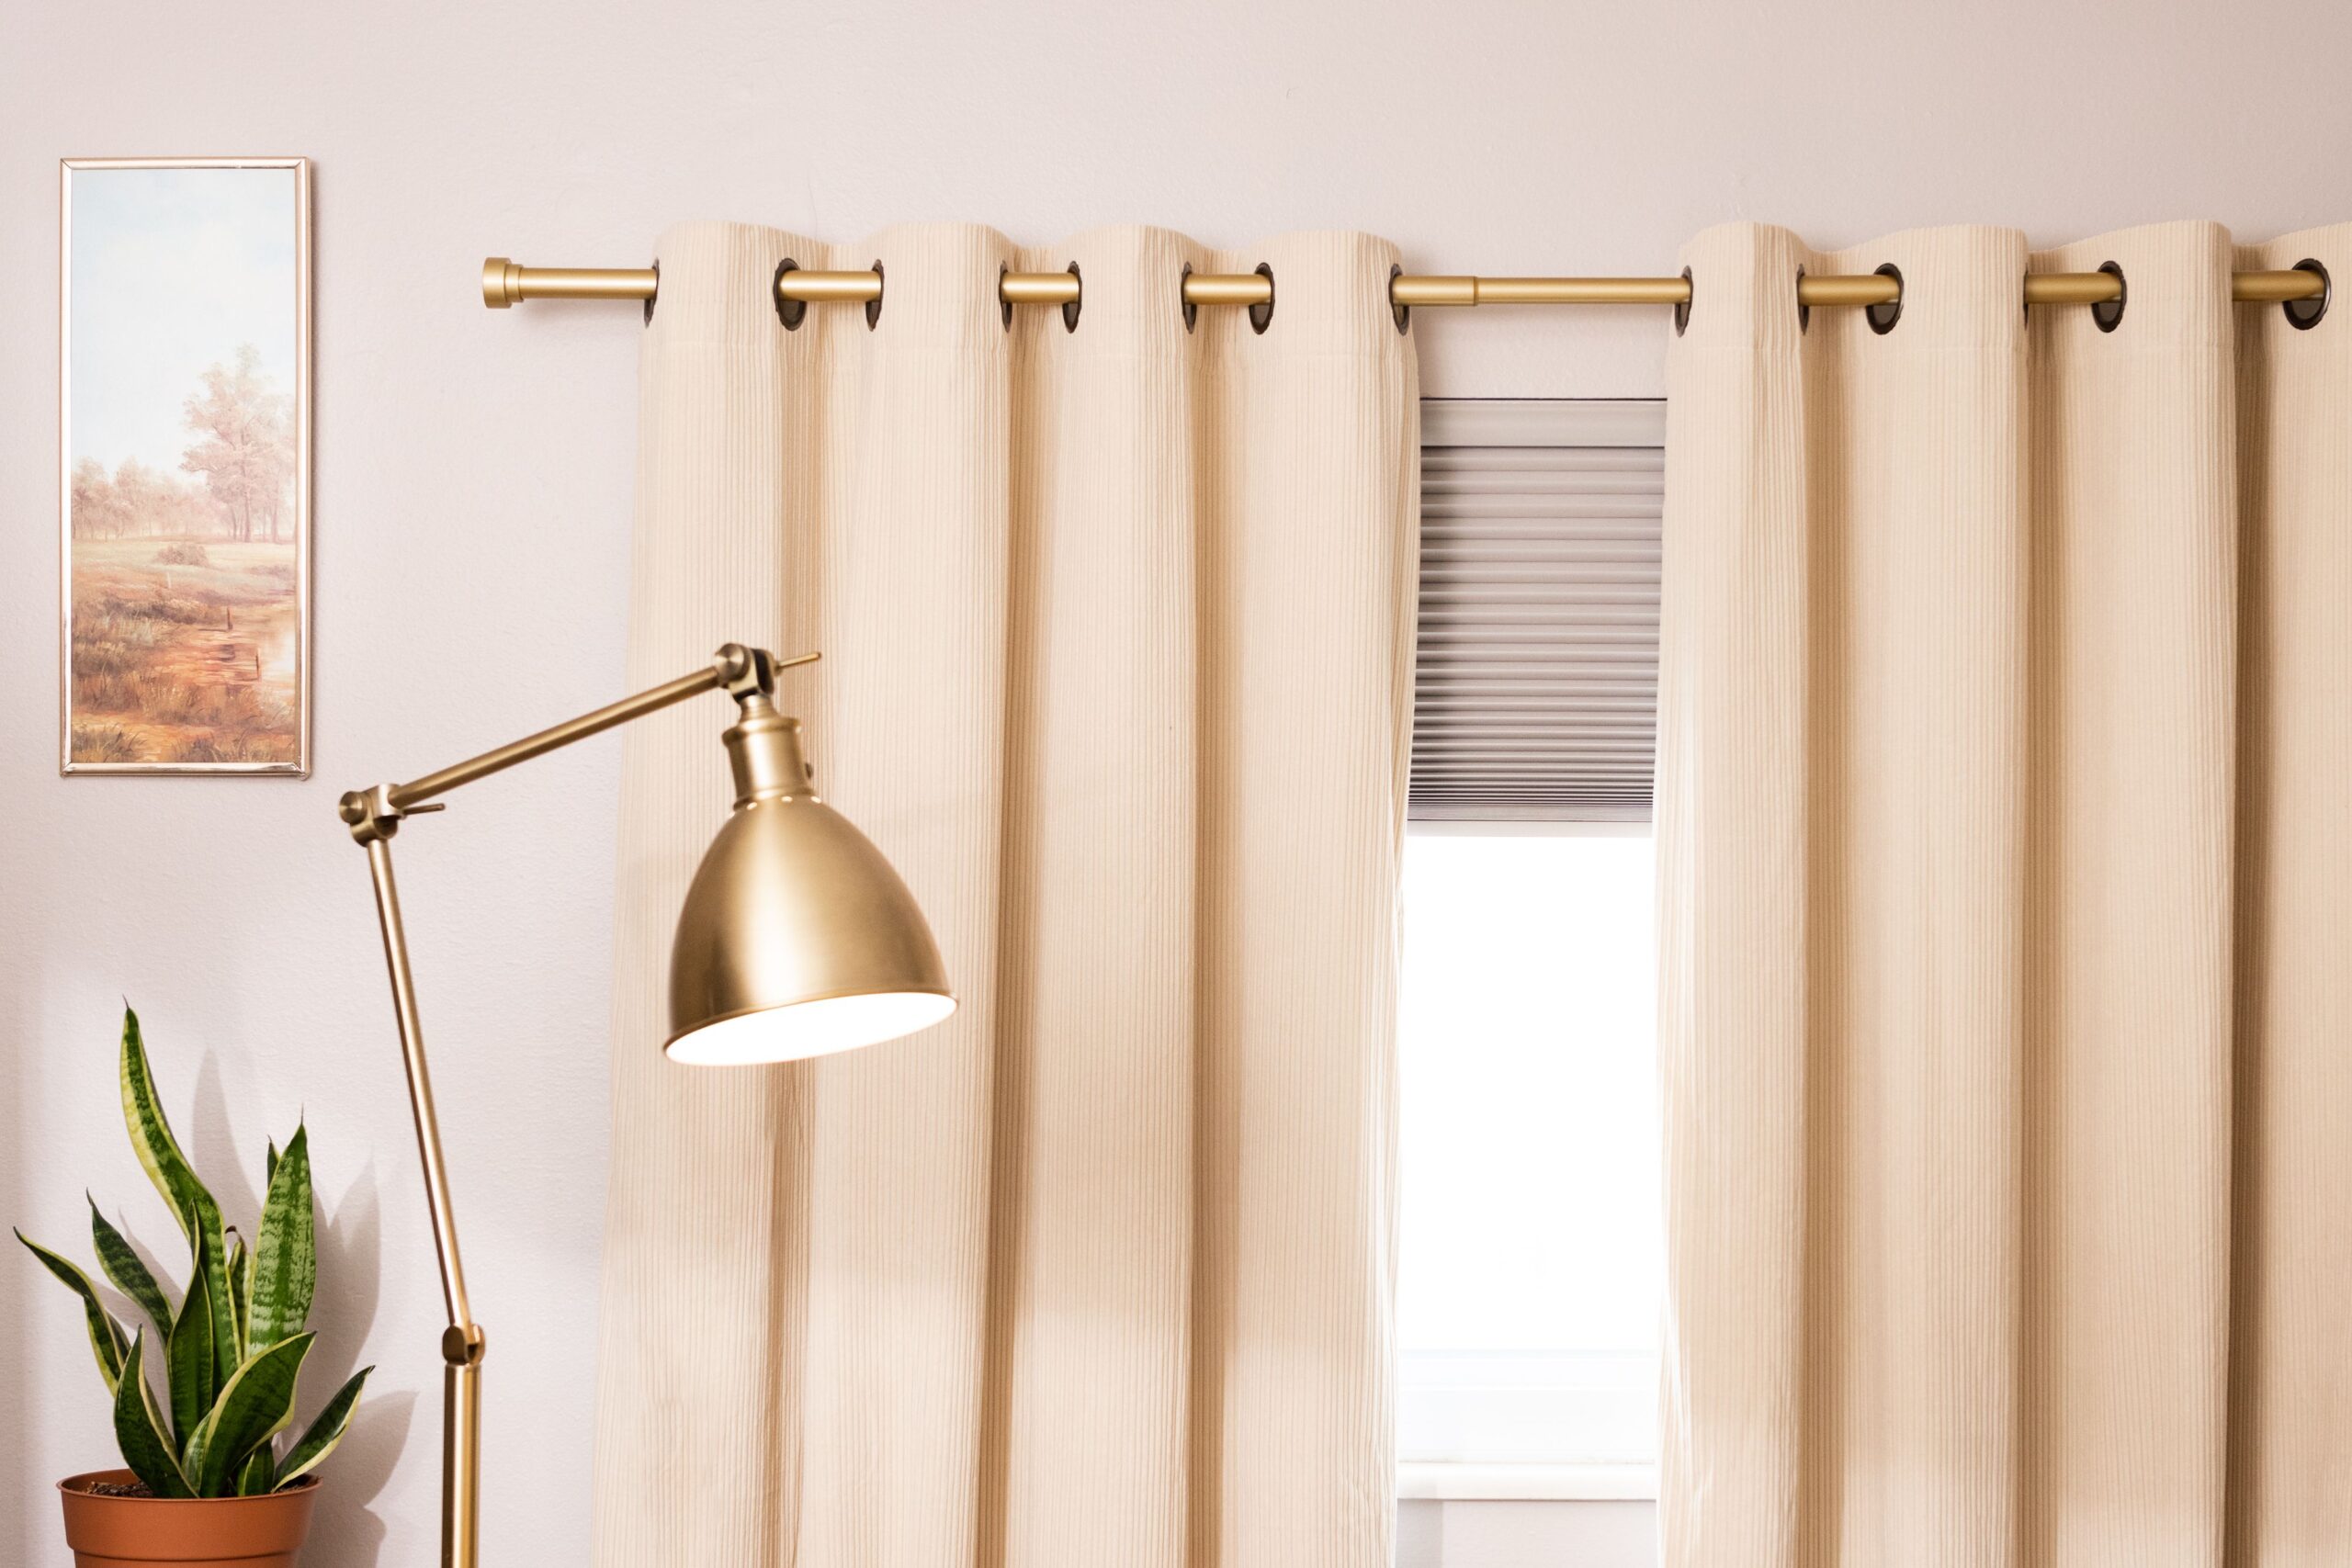 How much does it cost to hang a curtain rod?